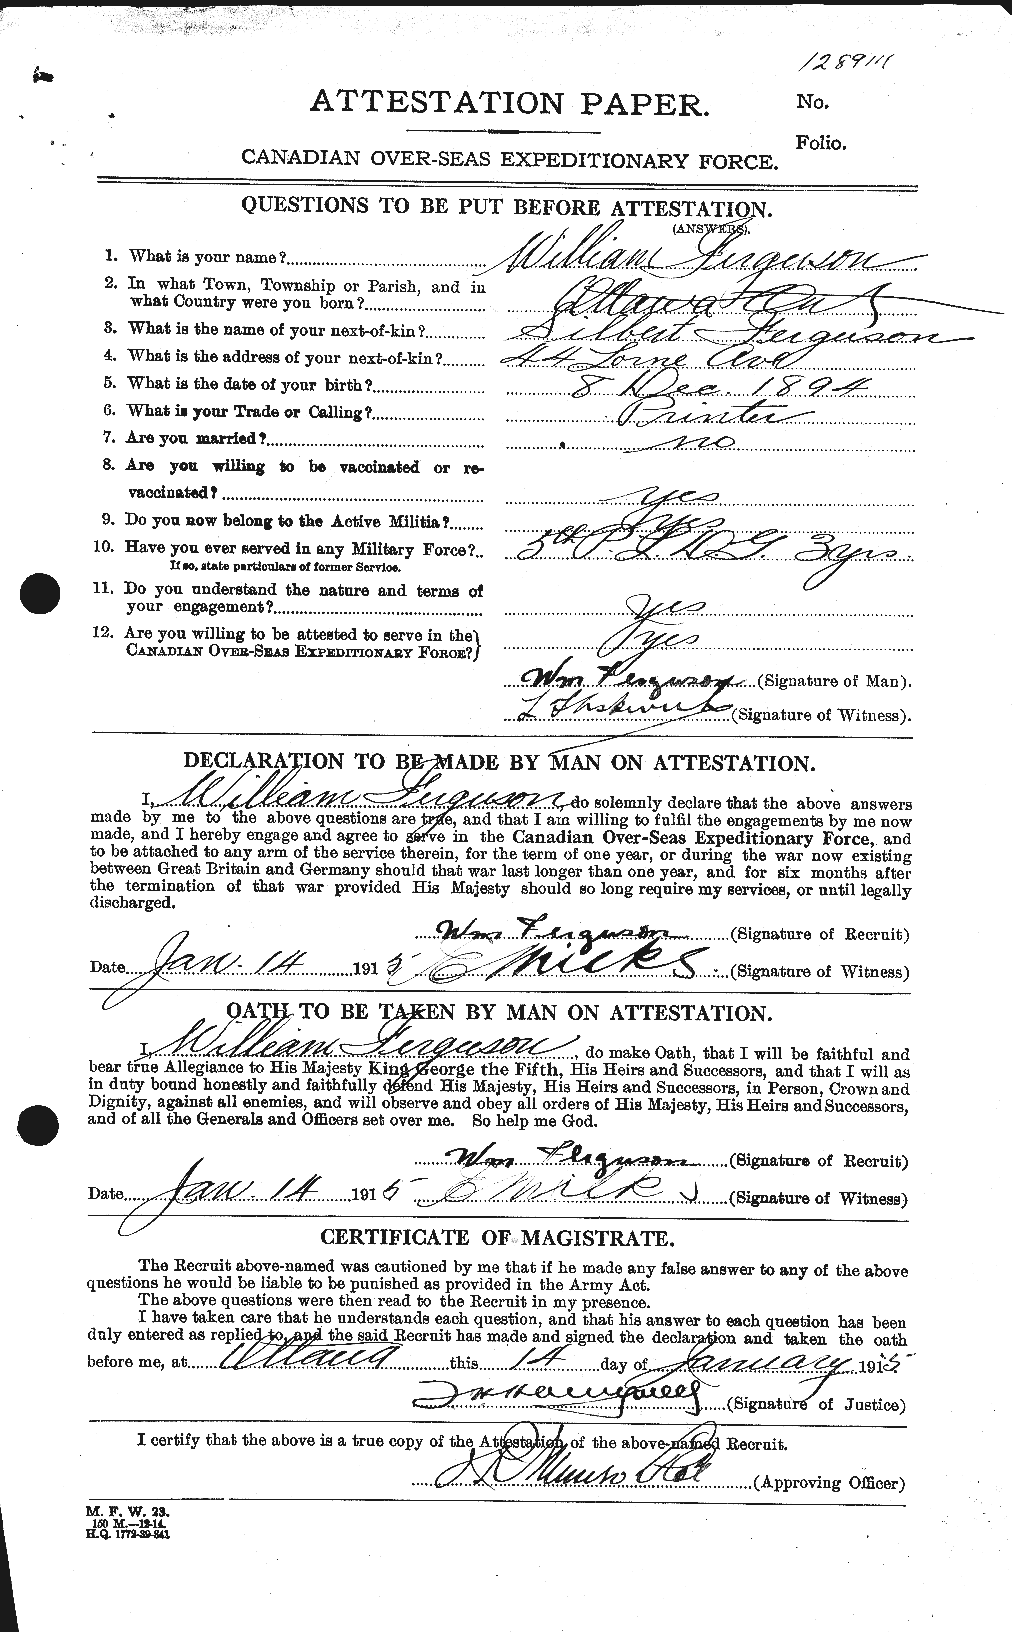 Personnel Records of the First World War - CEF 321737a